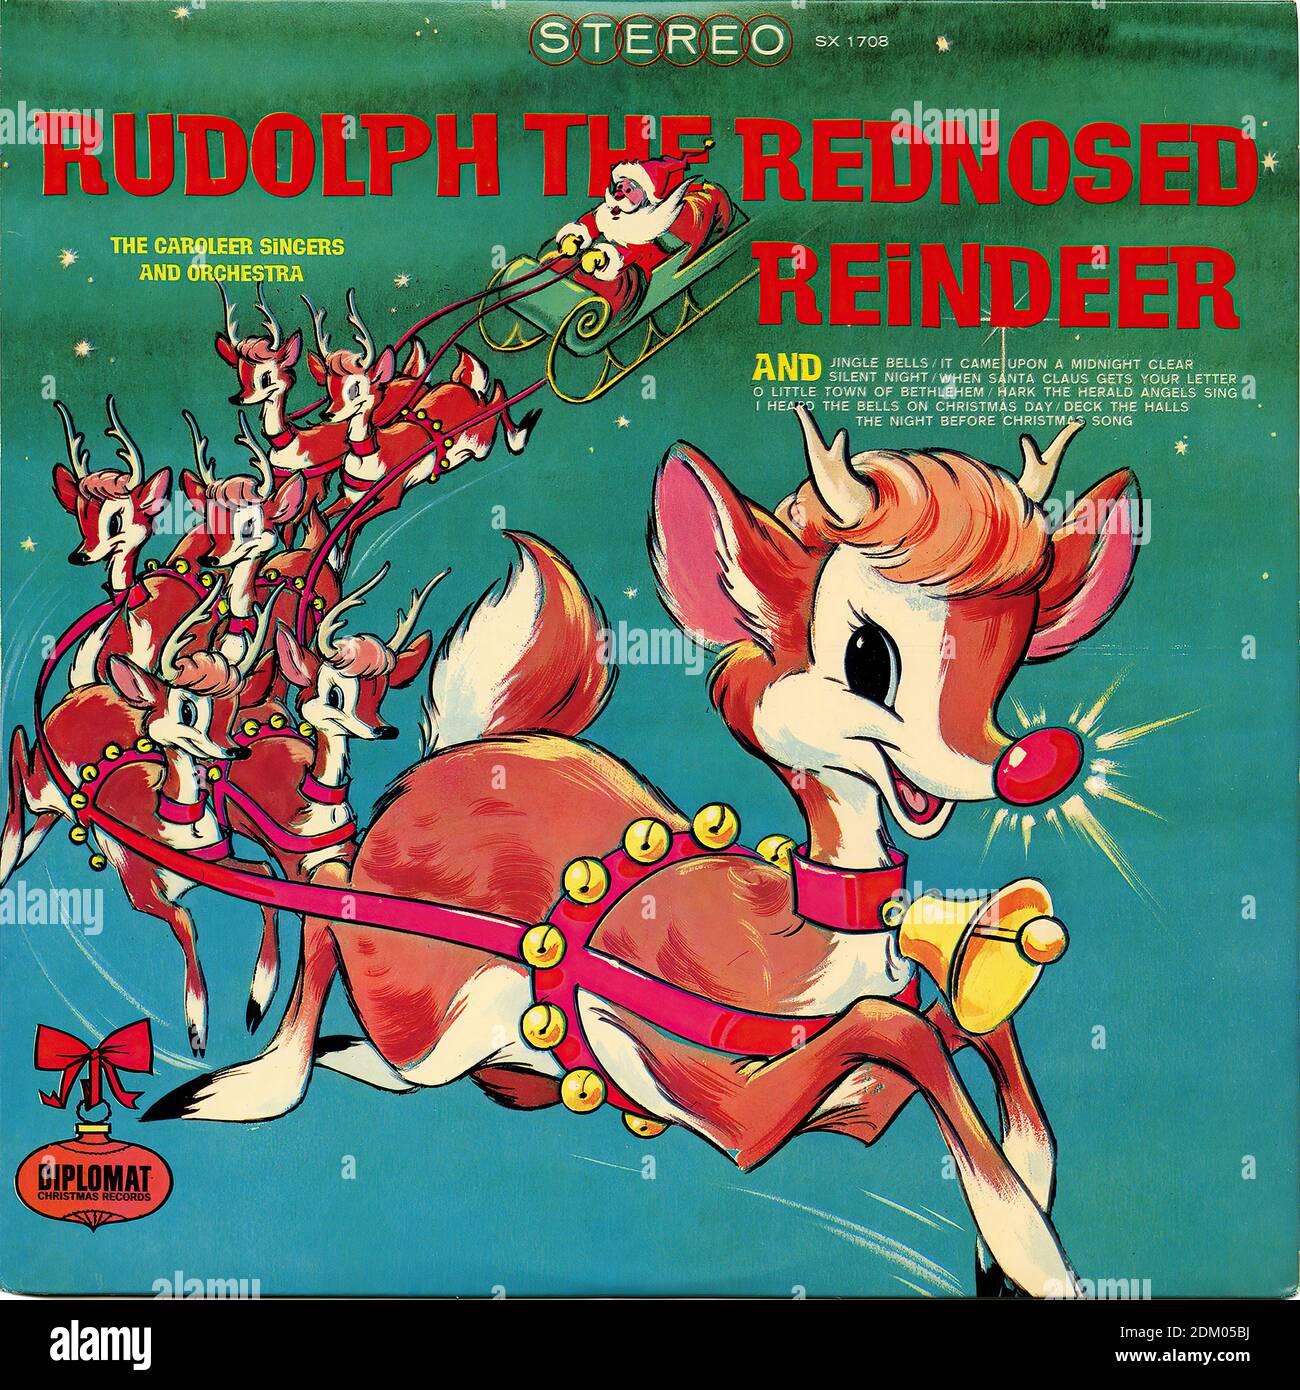 Rudolph the Red Nosed Reindeer - Vintage Record Cover Stock Photo